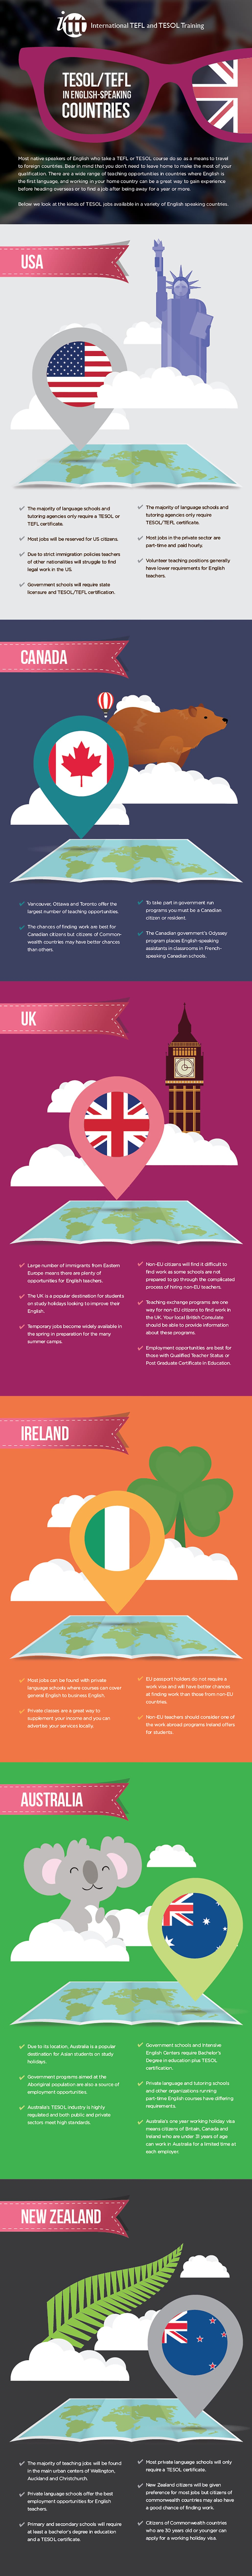 Infographic TESOL/TEFL in English-speaking countries